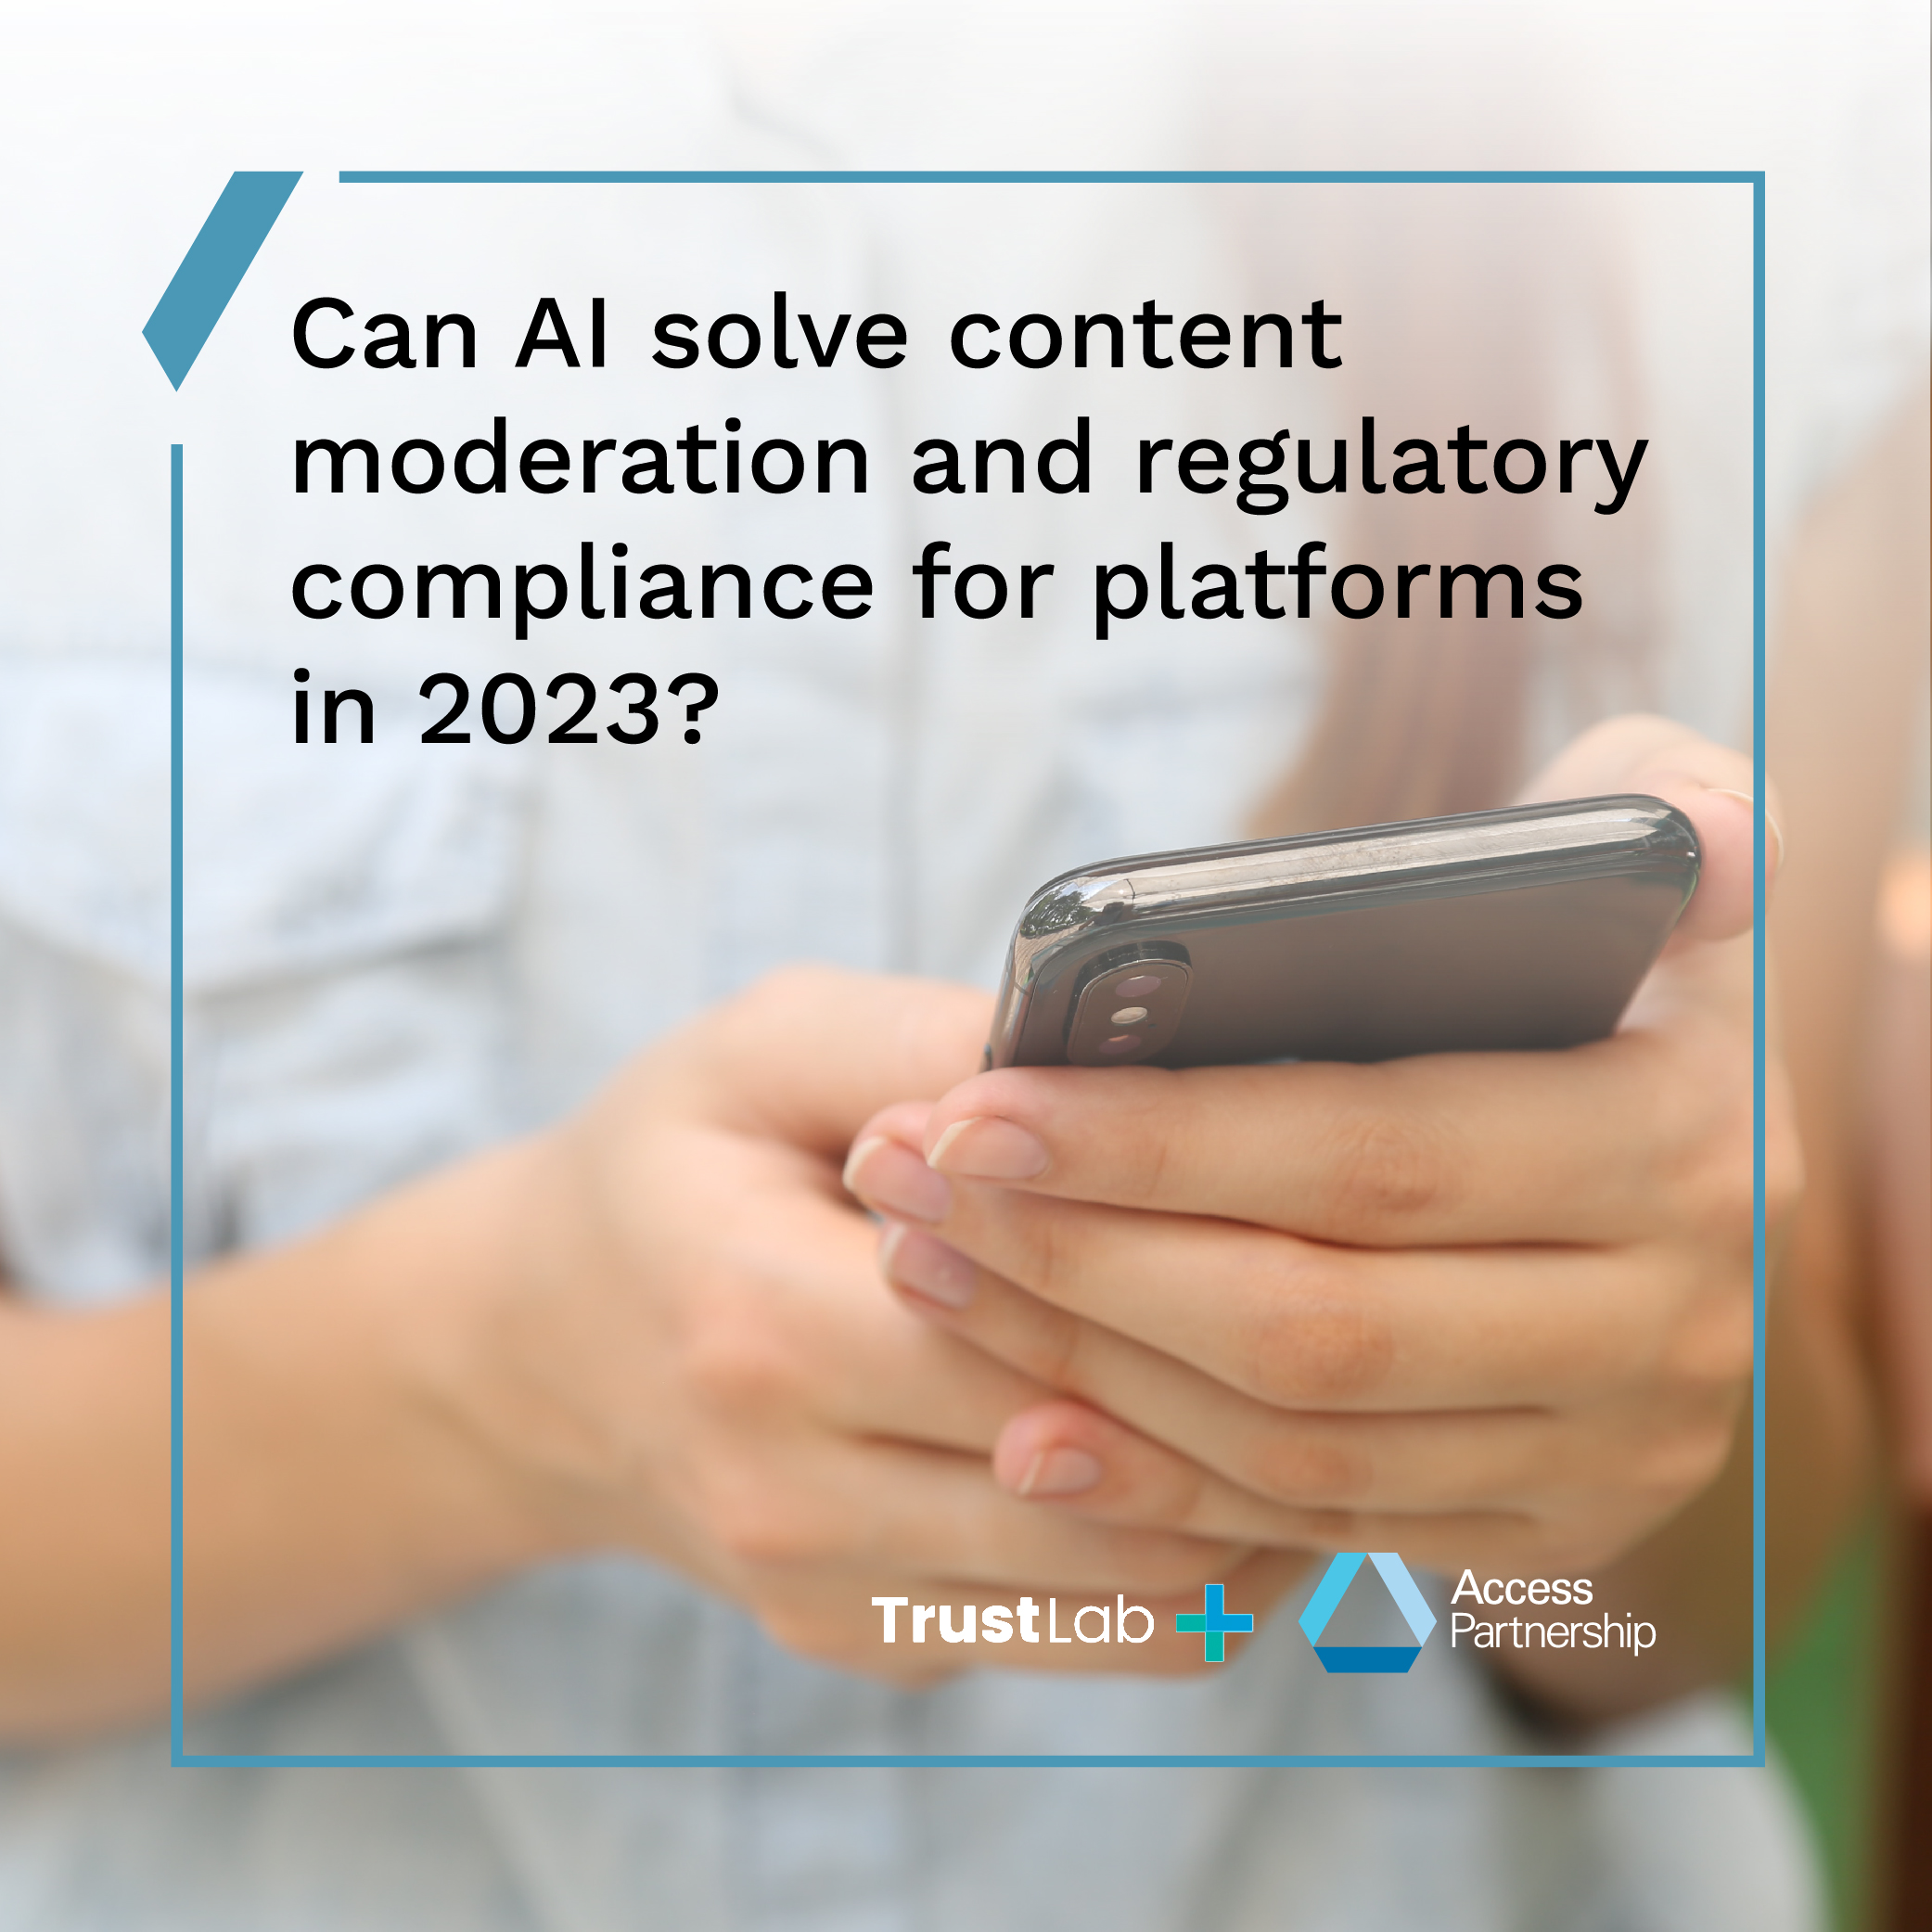 Can AI solve content moderation and regulatory compliance for platforms in 2023?